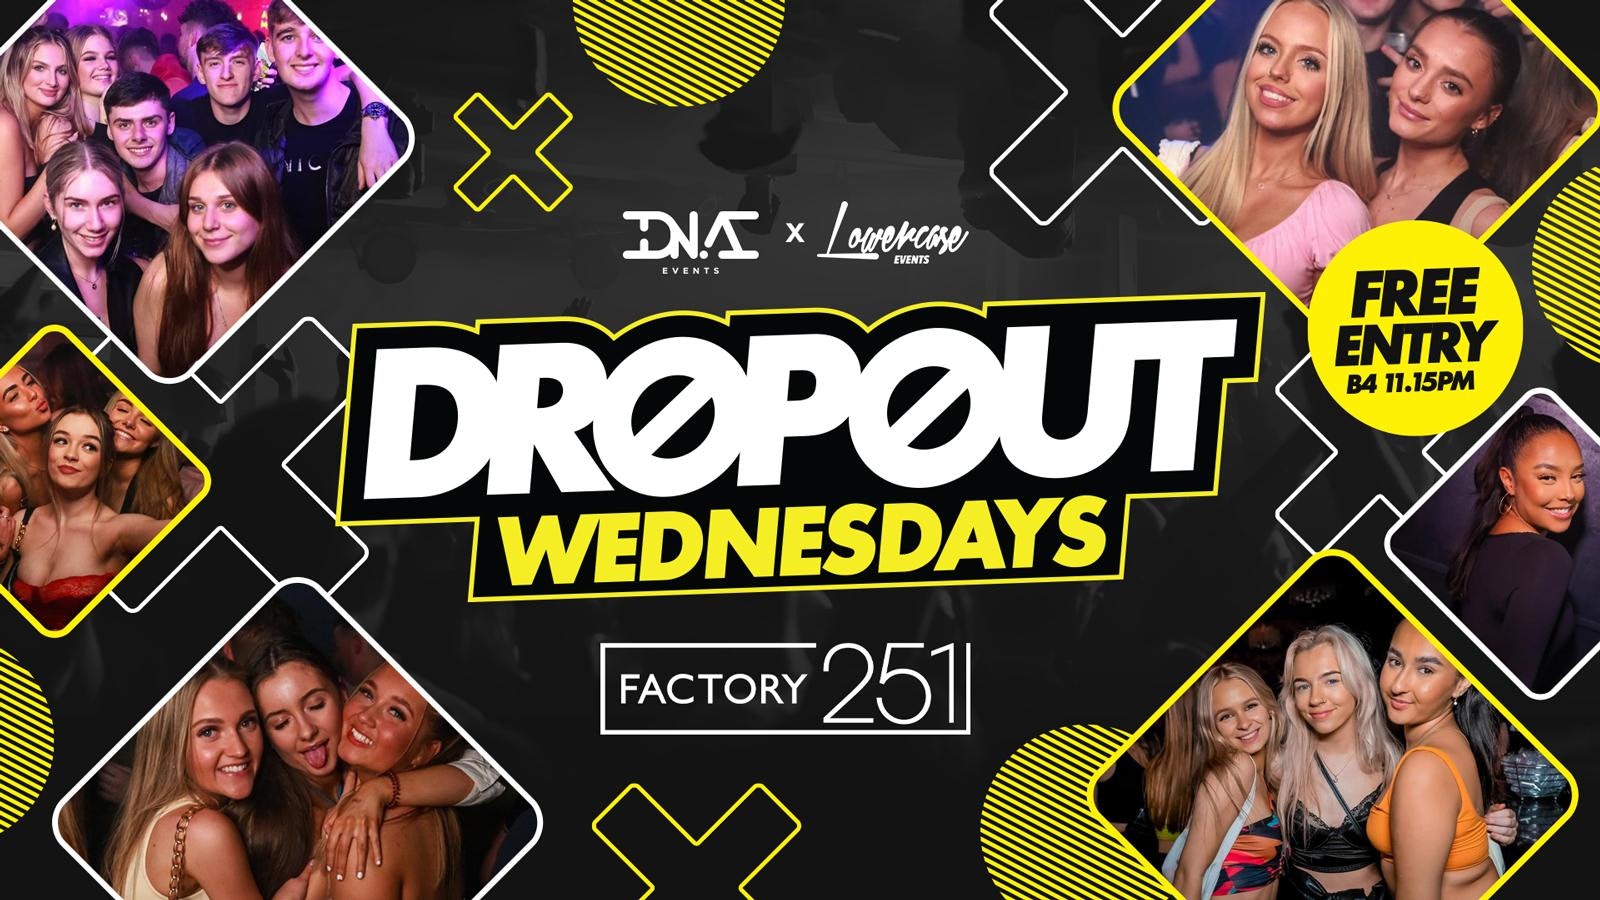 DROPOUT WEDNESDAY’S